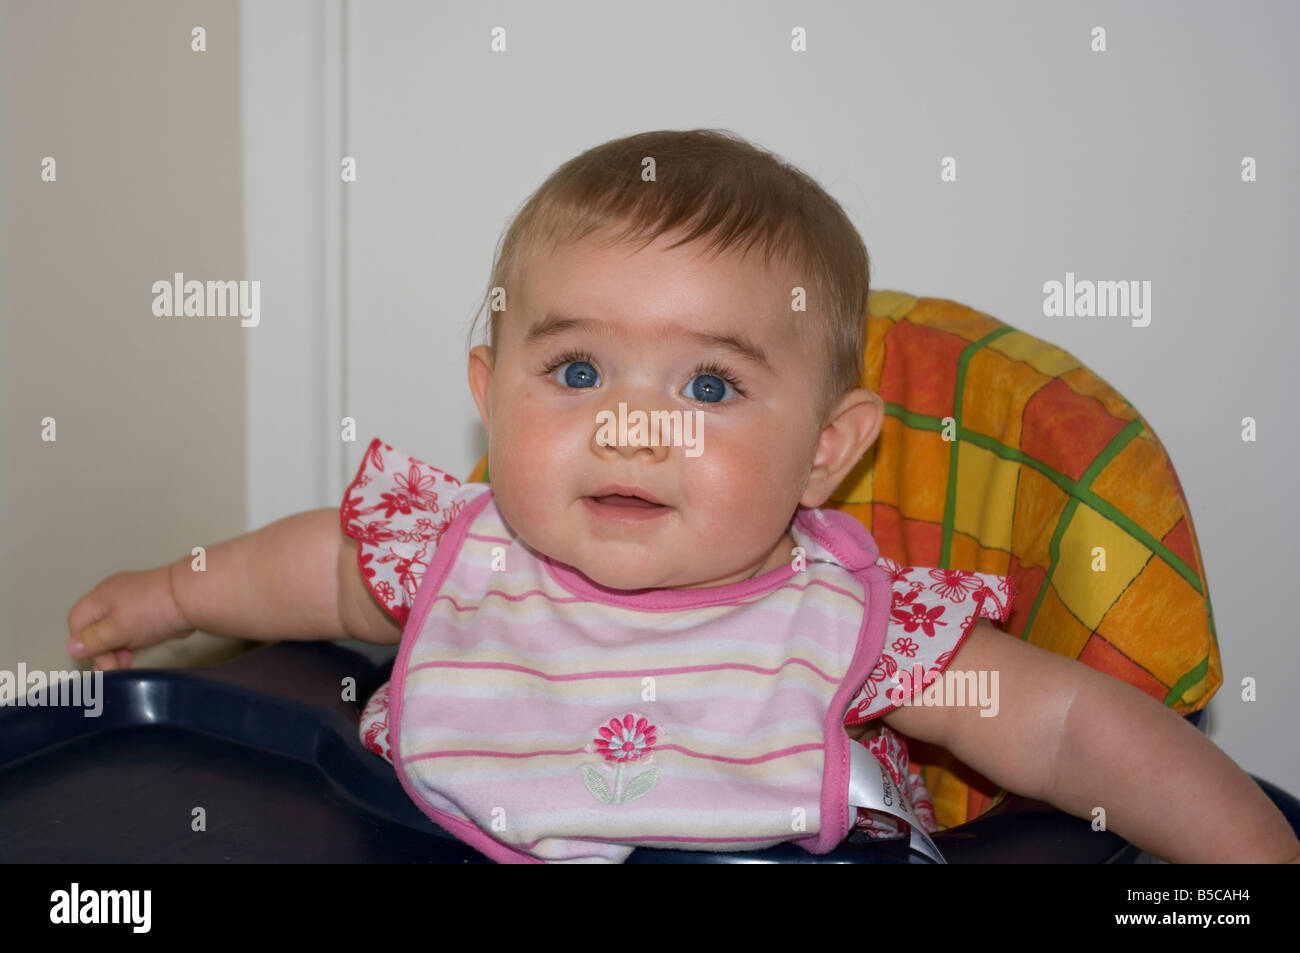 Baby Girl Child With Blue Eyes Smiling Stock Photo